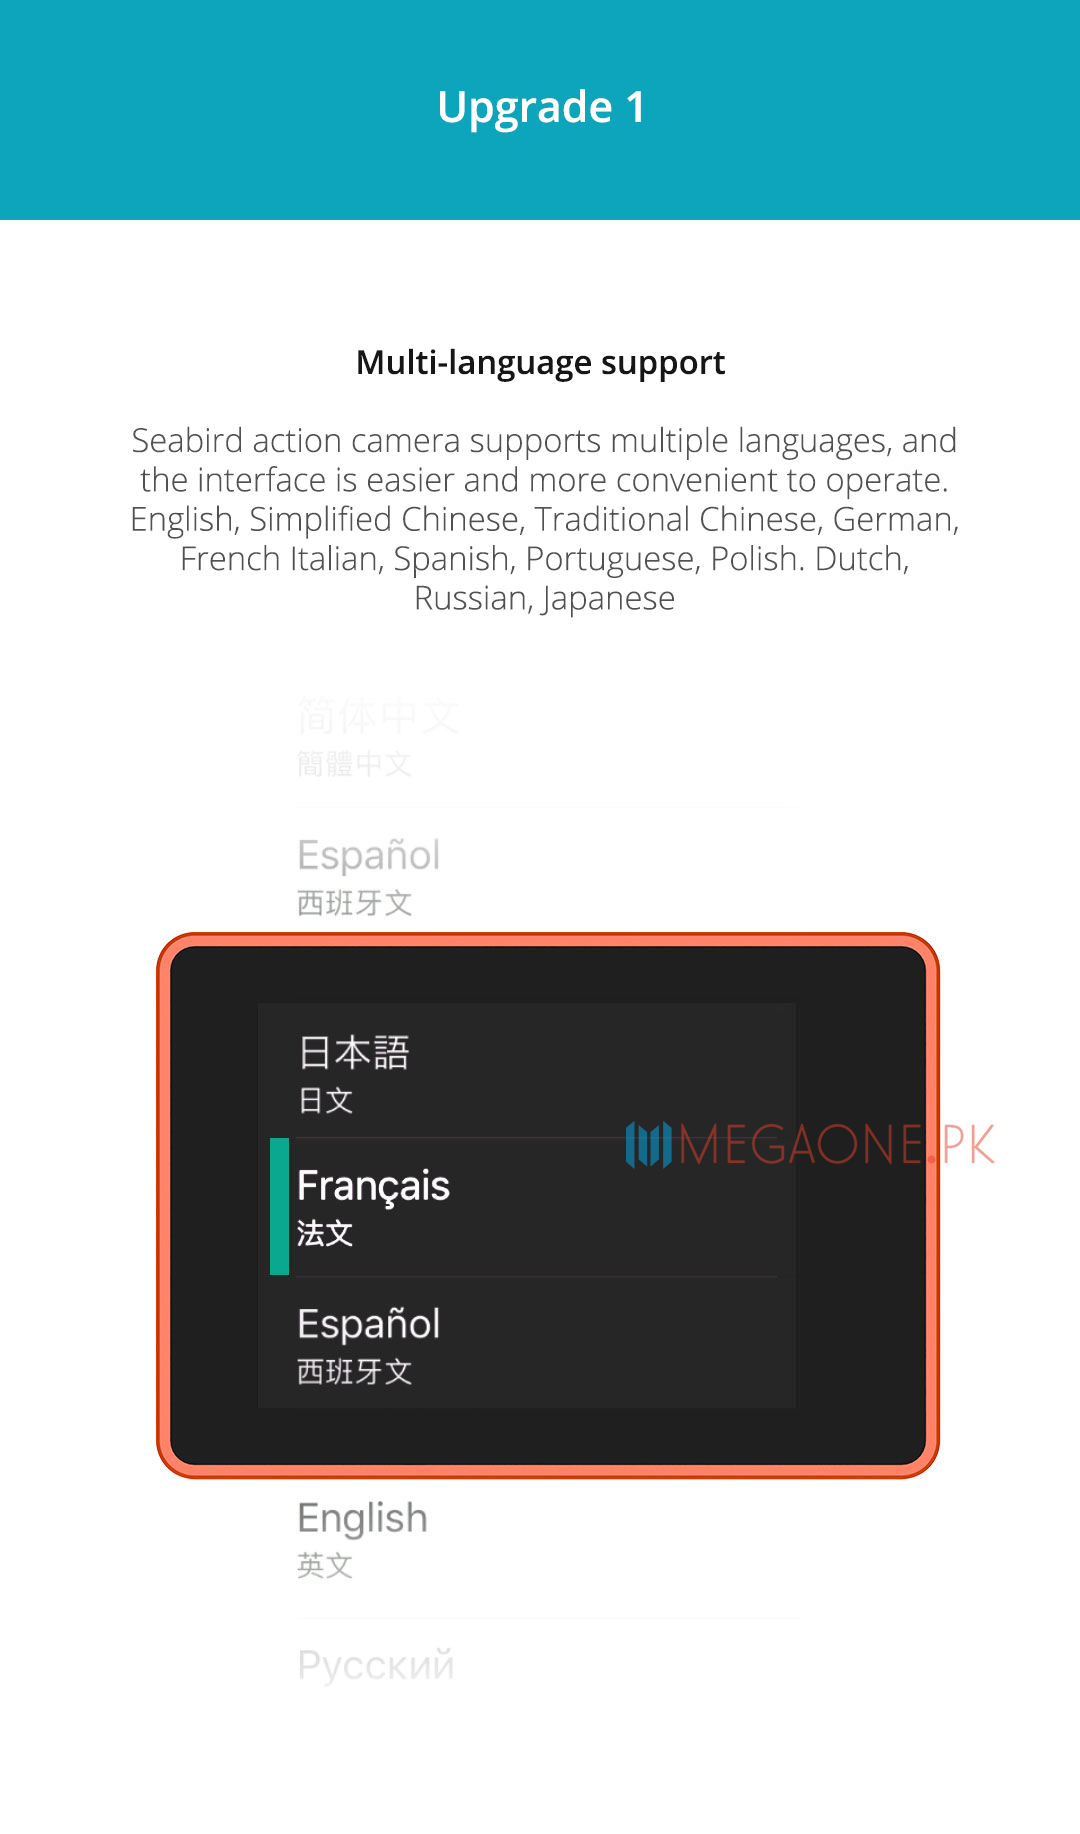 Seabird action camera supports multiple languages, and the interface is easier and more convenient to operate. English, Simplified Chinese, Traditional Chinese, German, French Italian, Spanish, Portuguese, Polish. Dutch, Russian, Japanese